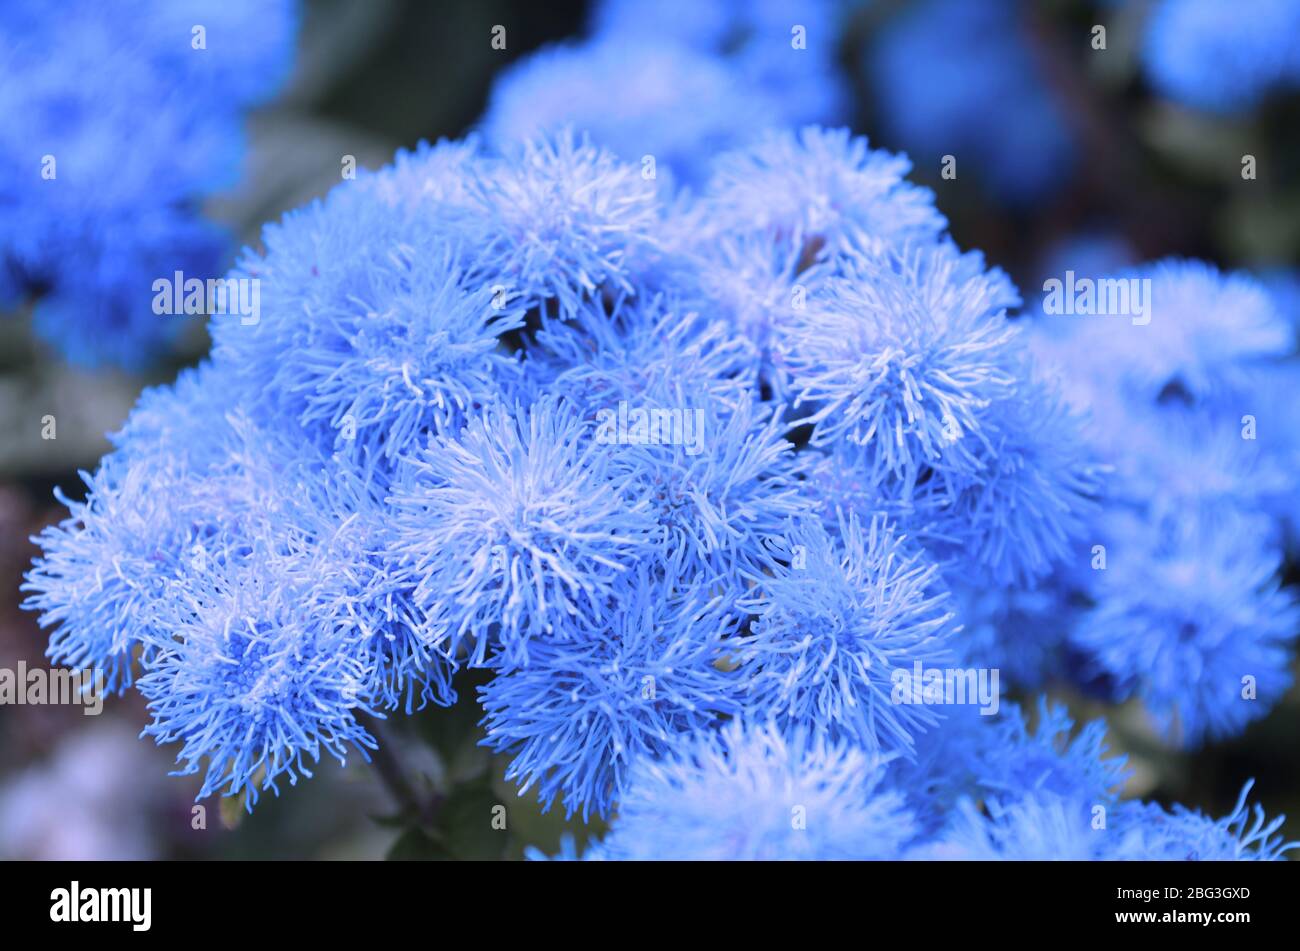 Background with blue ageratum flowers Stock Photo